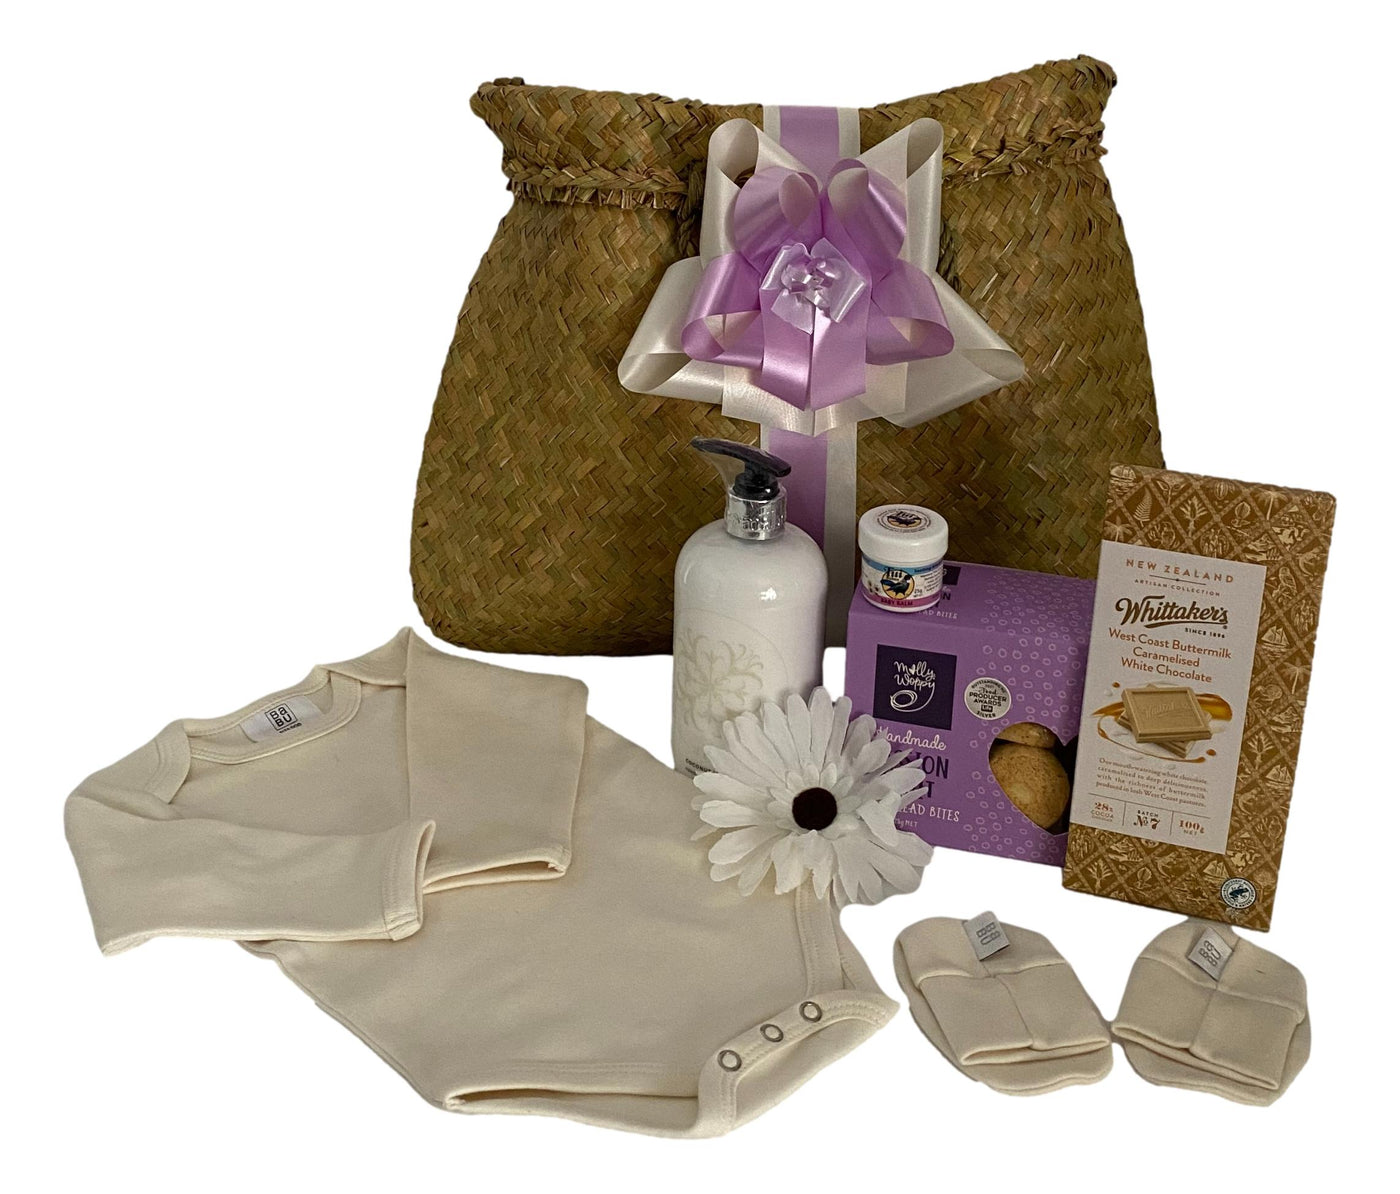 New Born Baby Hampers and Baby Shower Gifts New Zealand